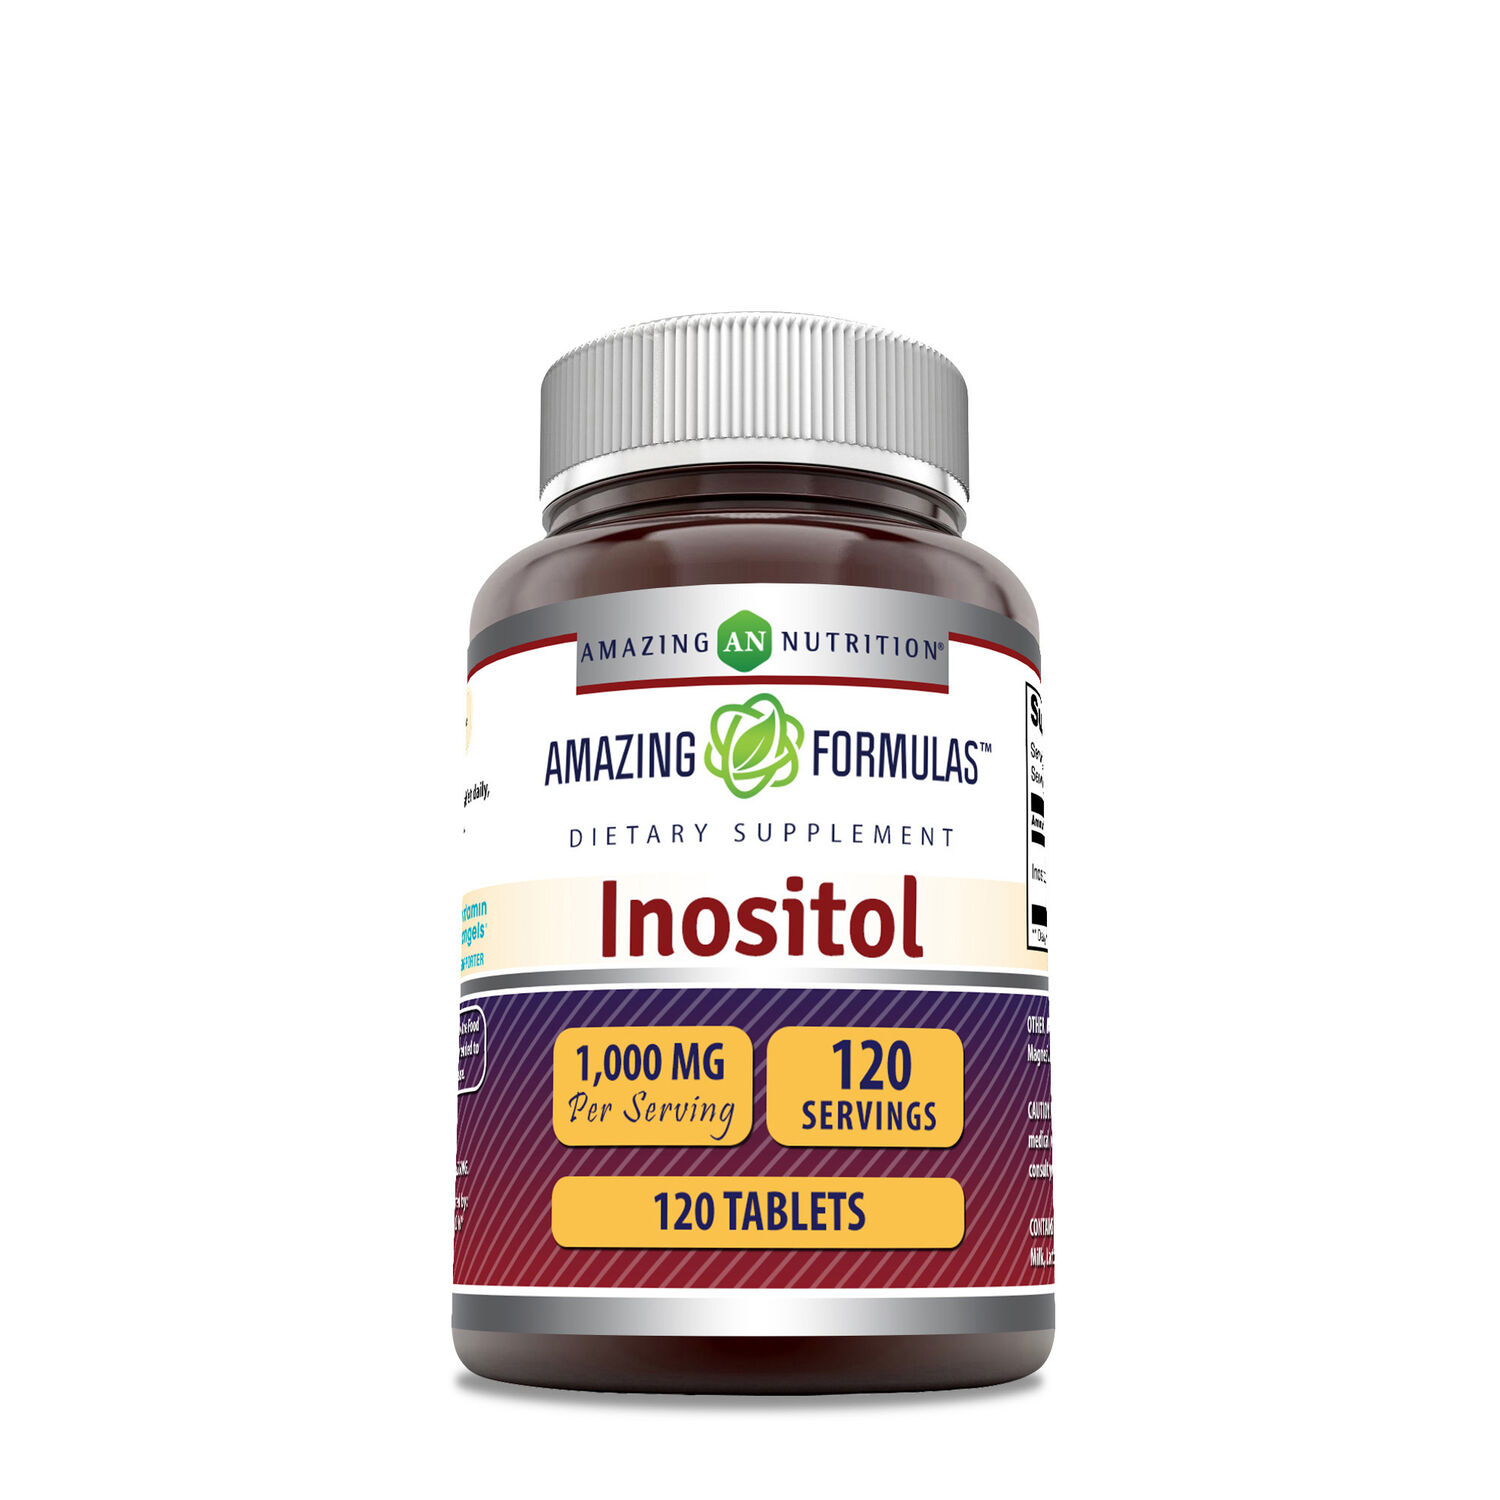 Amazing Nutrition Inositol 1000Mg - 120 Tablets (120 Servings)